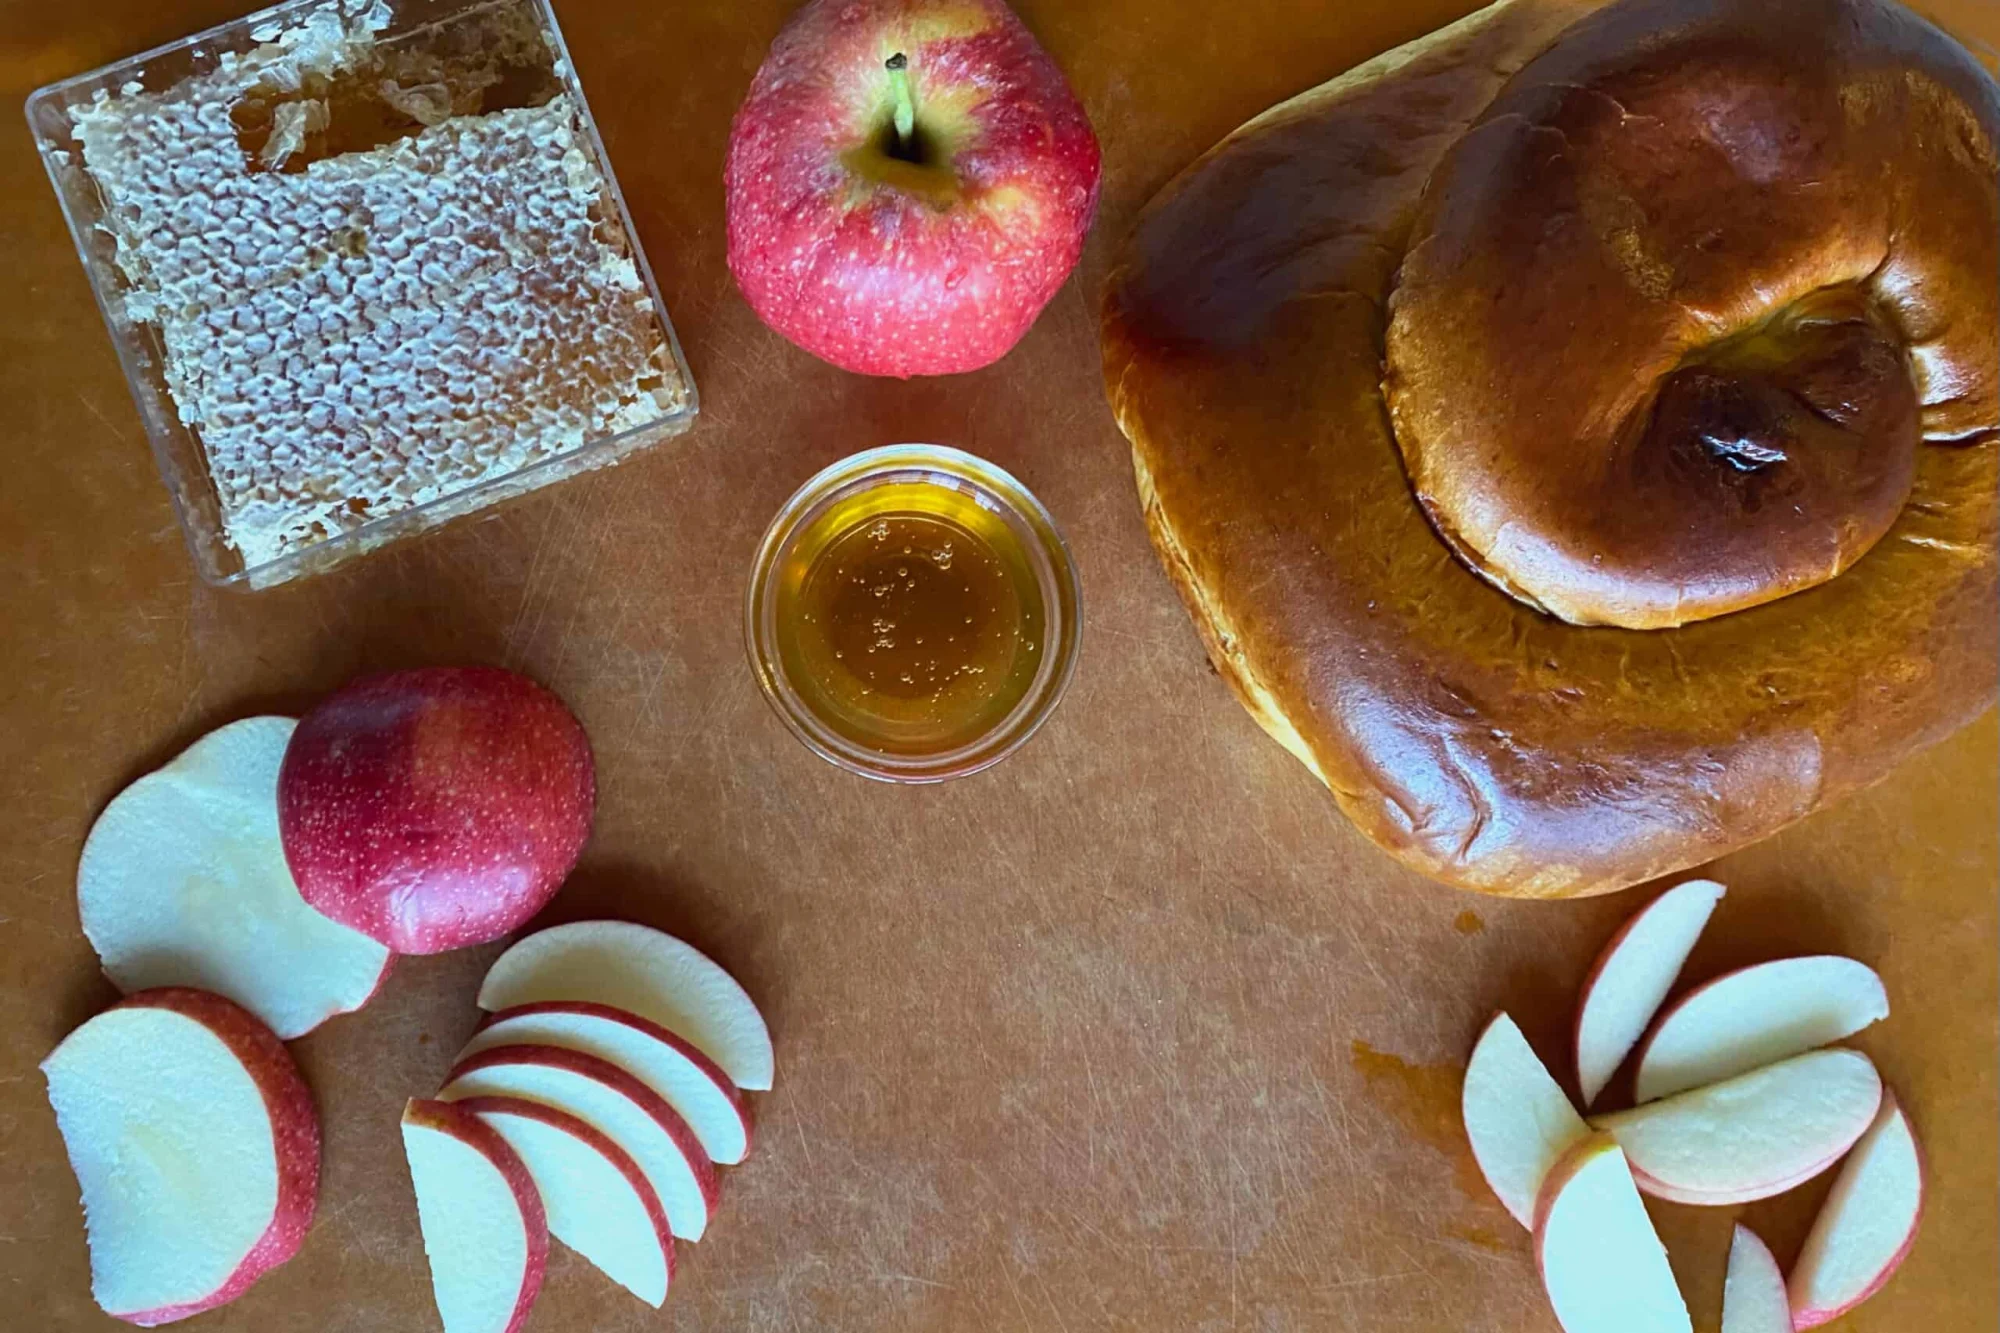 a cutting board with challah, apples and honey on it